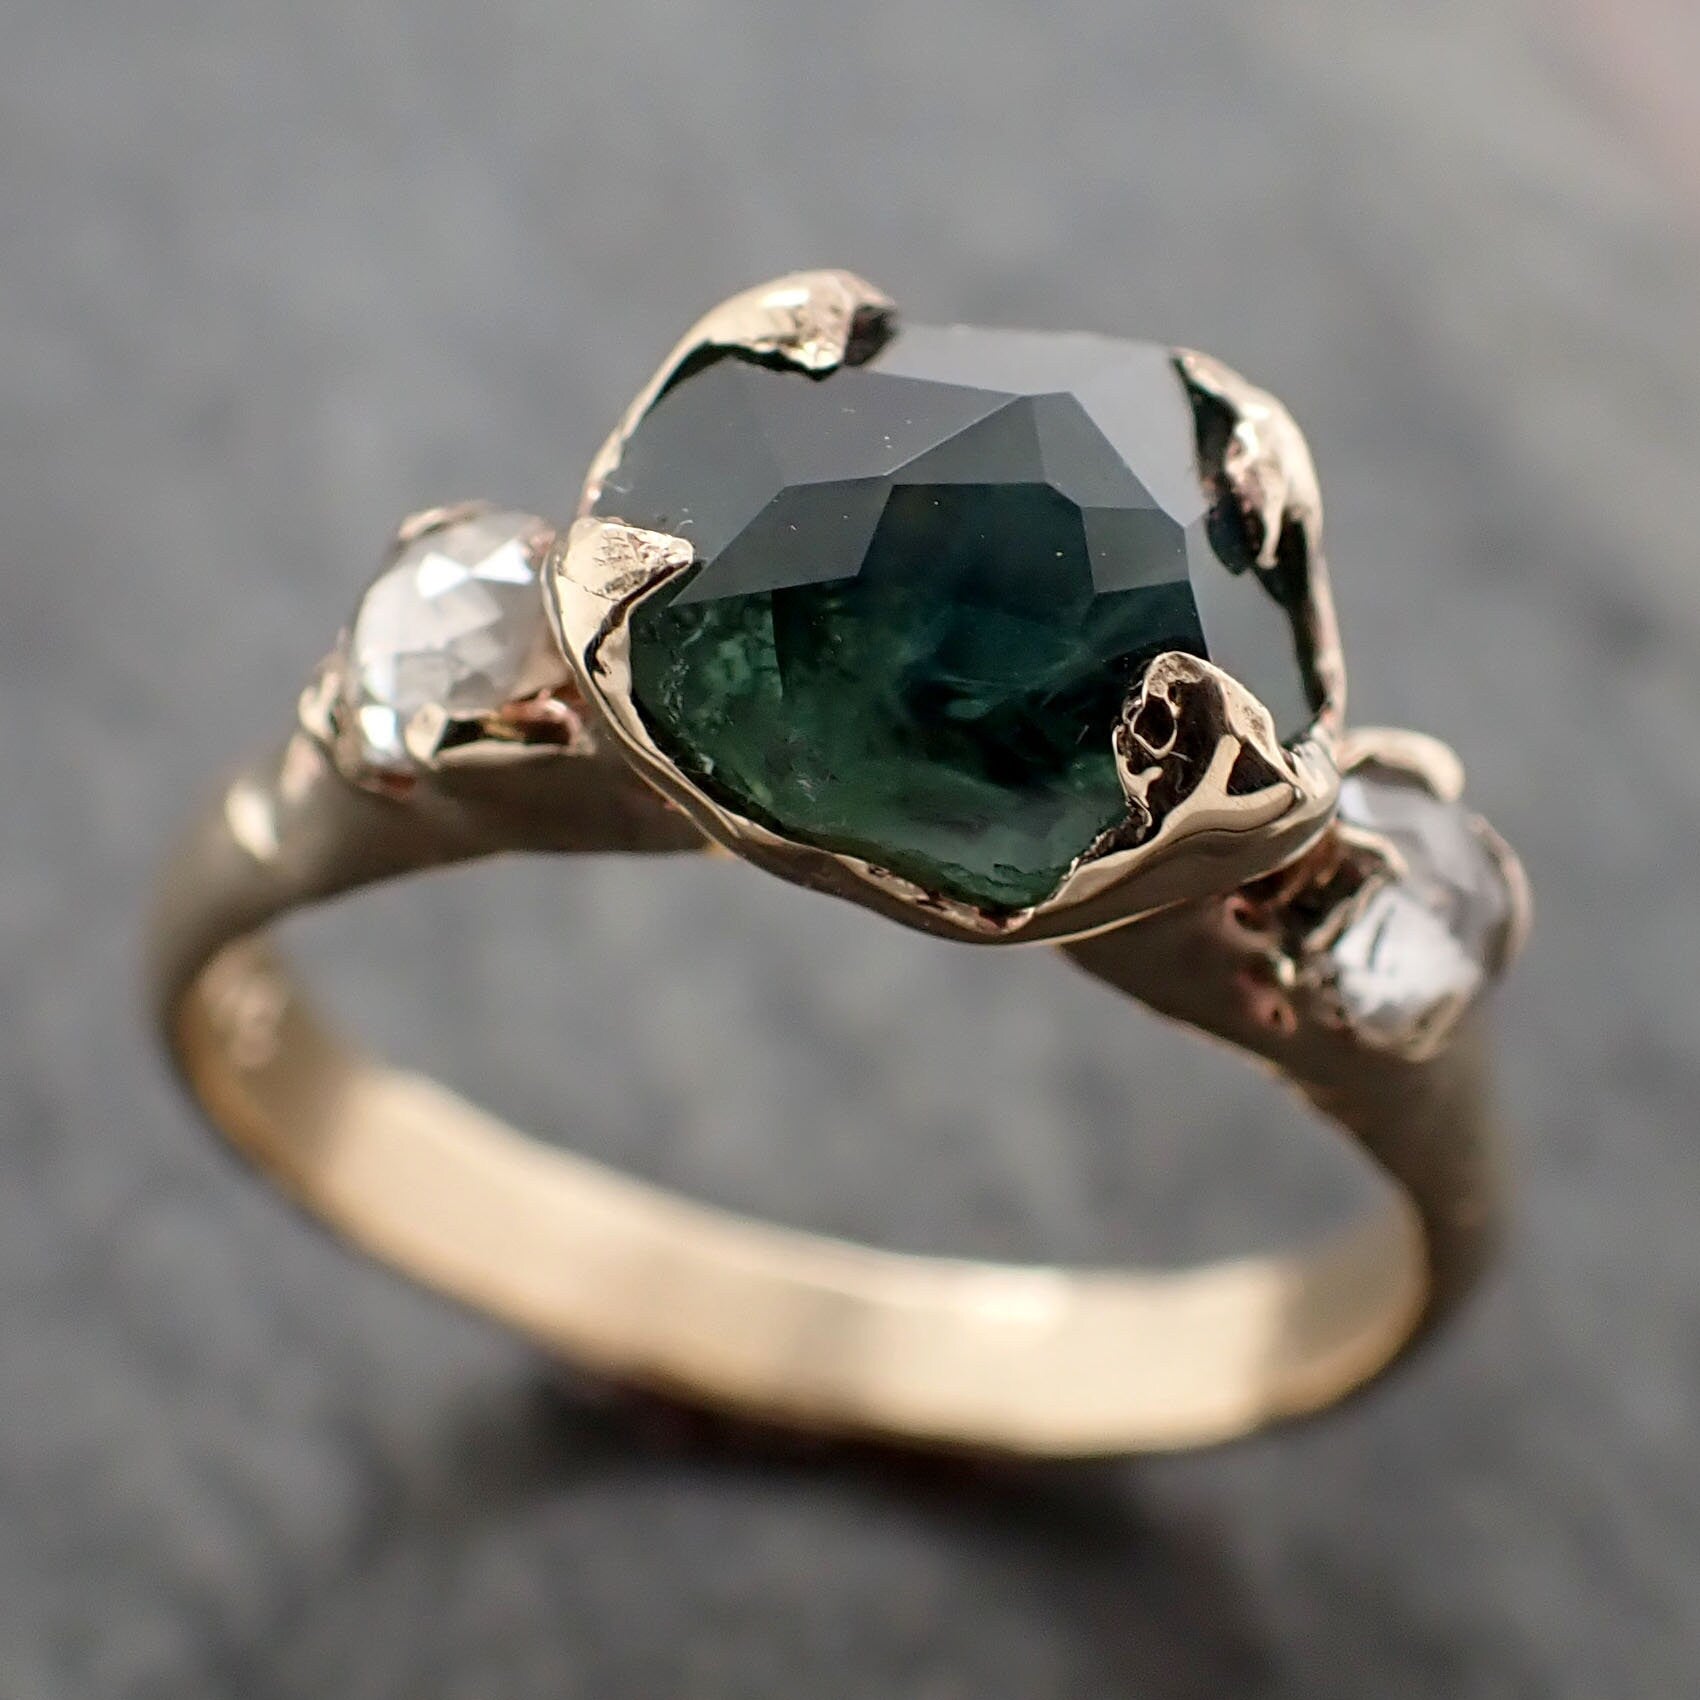 Partially faceted blue green Montana Sapphire and fancy Diamonds 14k Yellow Gold Engagement Wedding Ring Gemstone Ring Multi stone Ring 3247